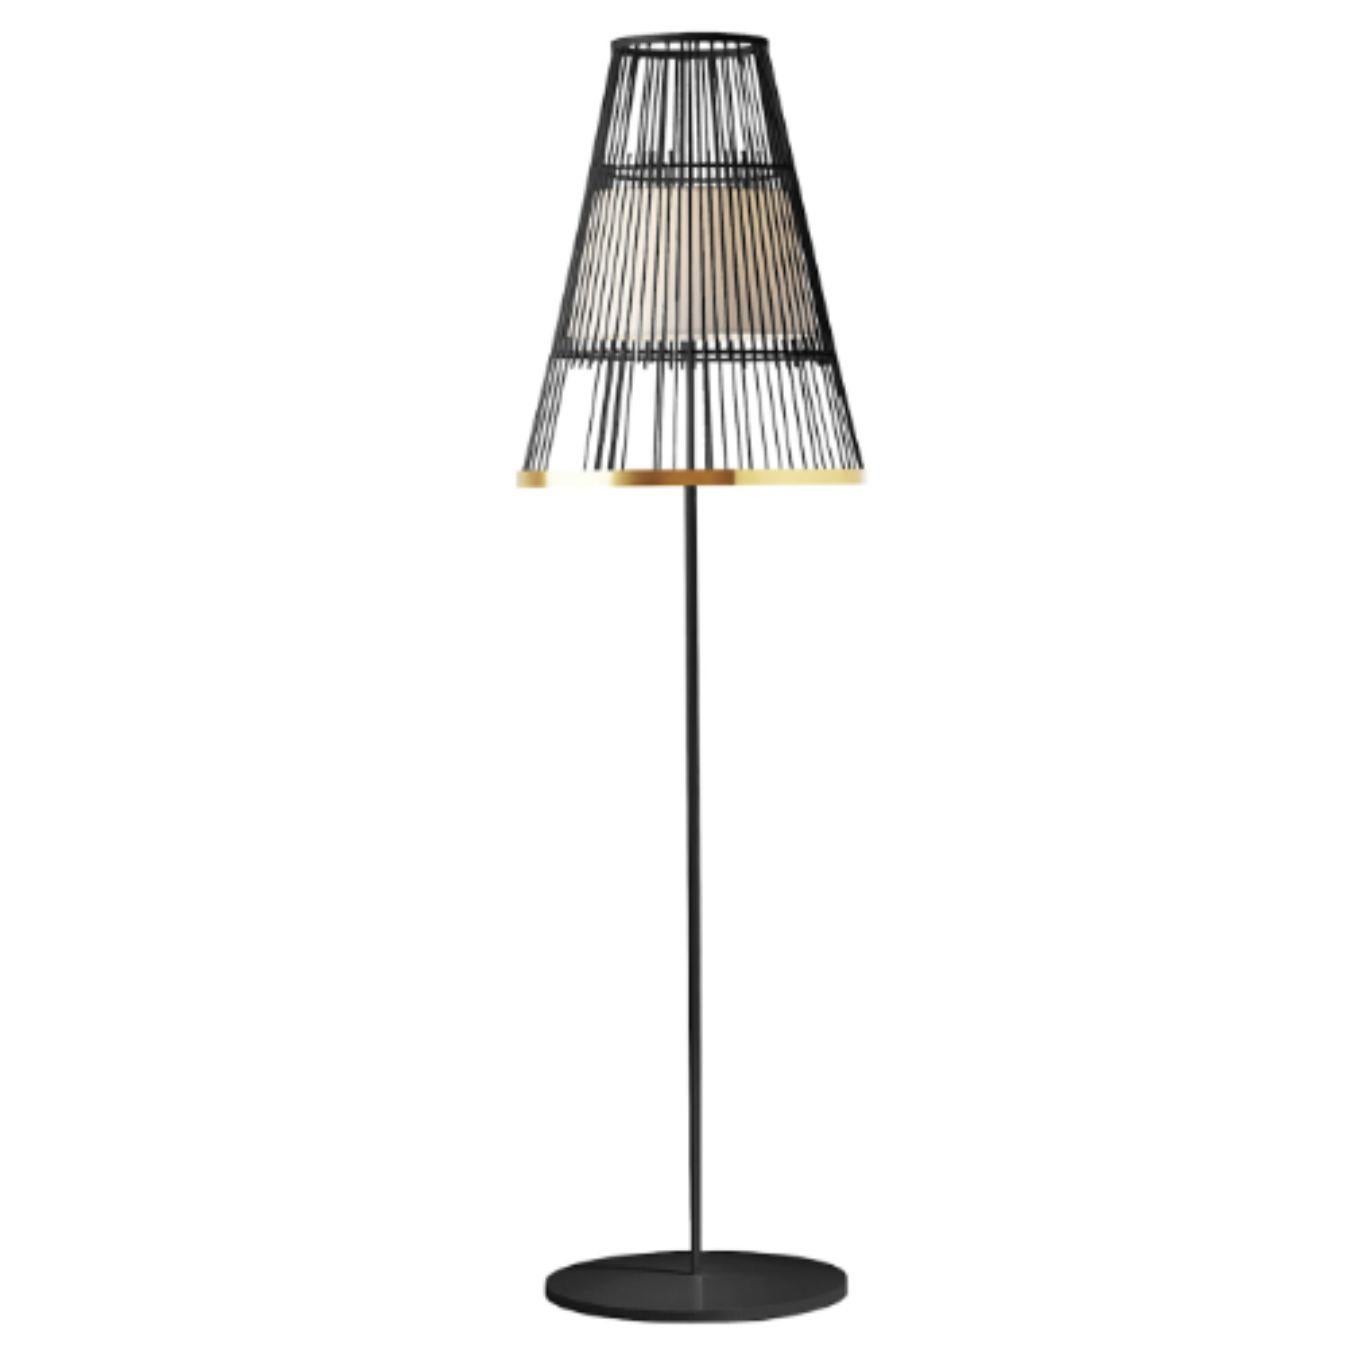 Black up floor lamp with brass ring by Dooq.
Dimensions: W 47 x D 47 x H 170 cm.
Materials: lacquered metal, polished or brushed metal, brass.
abat-jour: cotton
Also available in different colors and